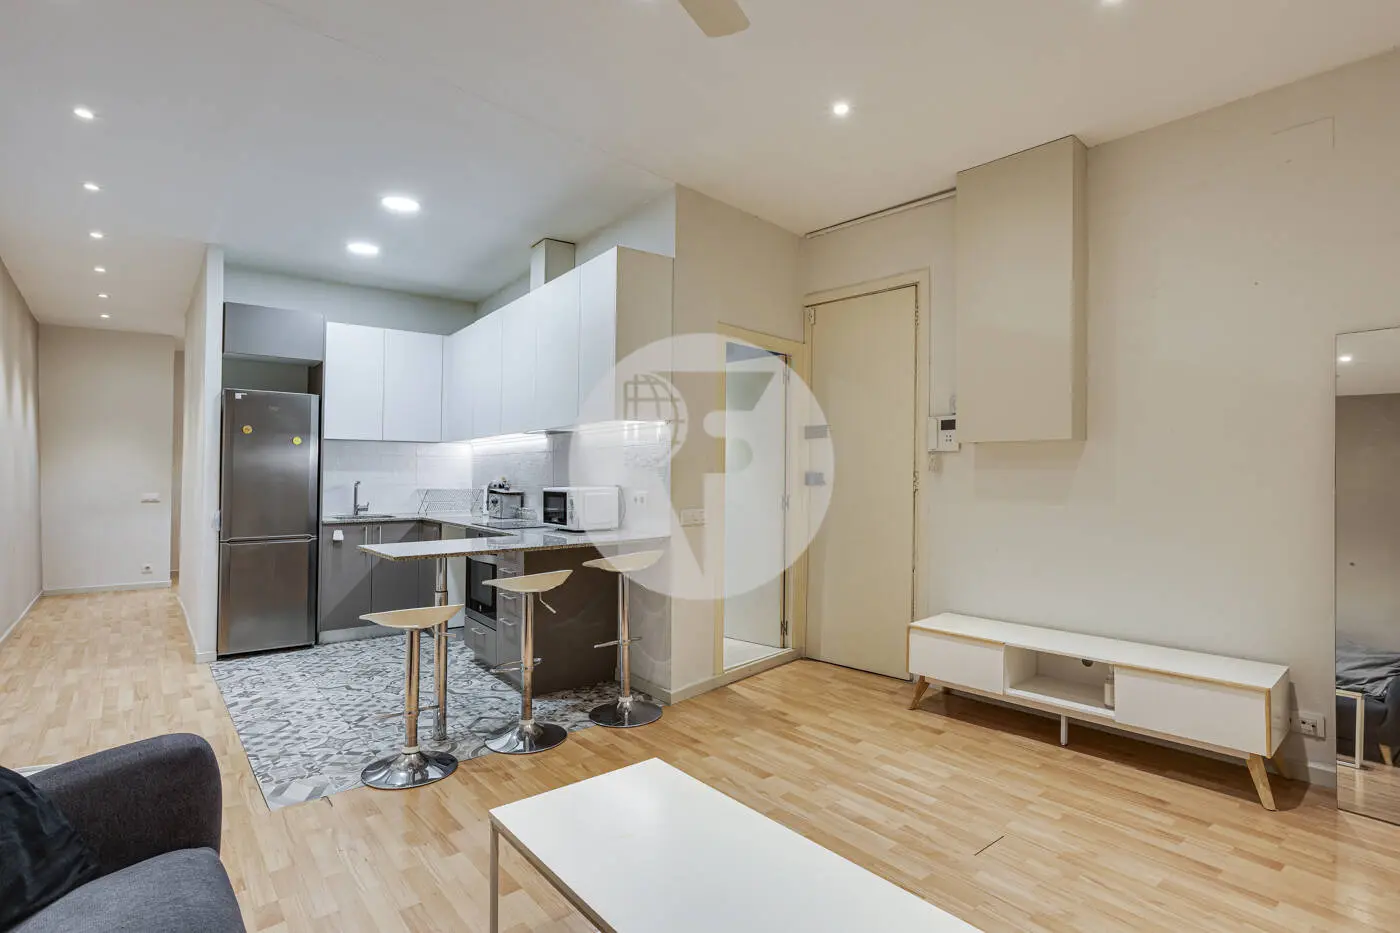 Magnificent apartment for sale next to Pl Universitat of 114m2 according to the land registry, located on Tallers Street in the Ciutat Vella neighborhood of Barcelona 2